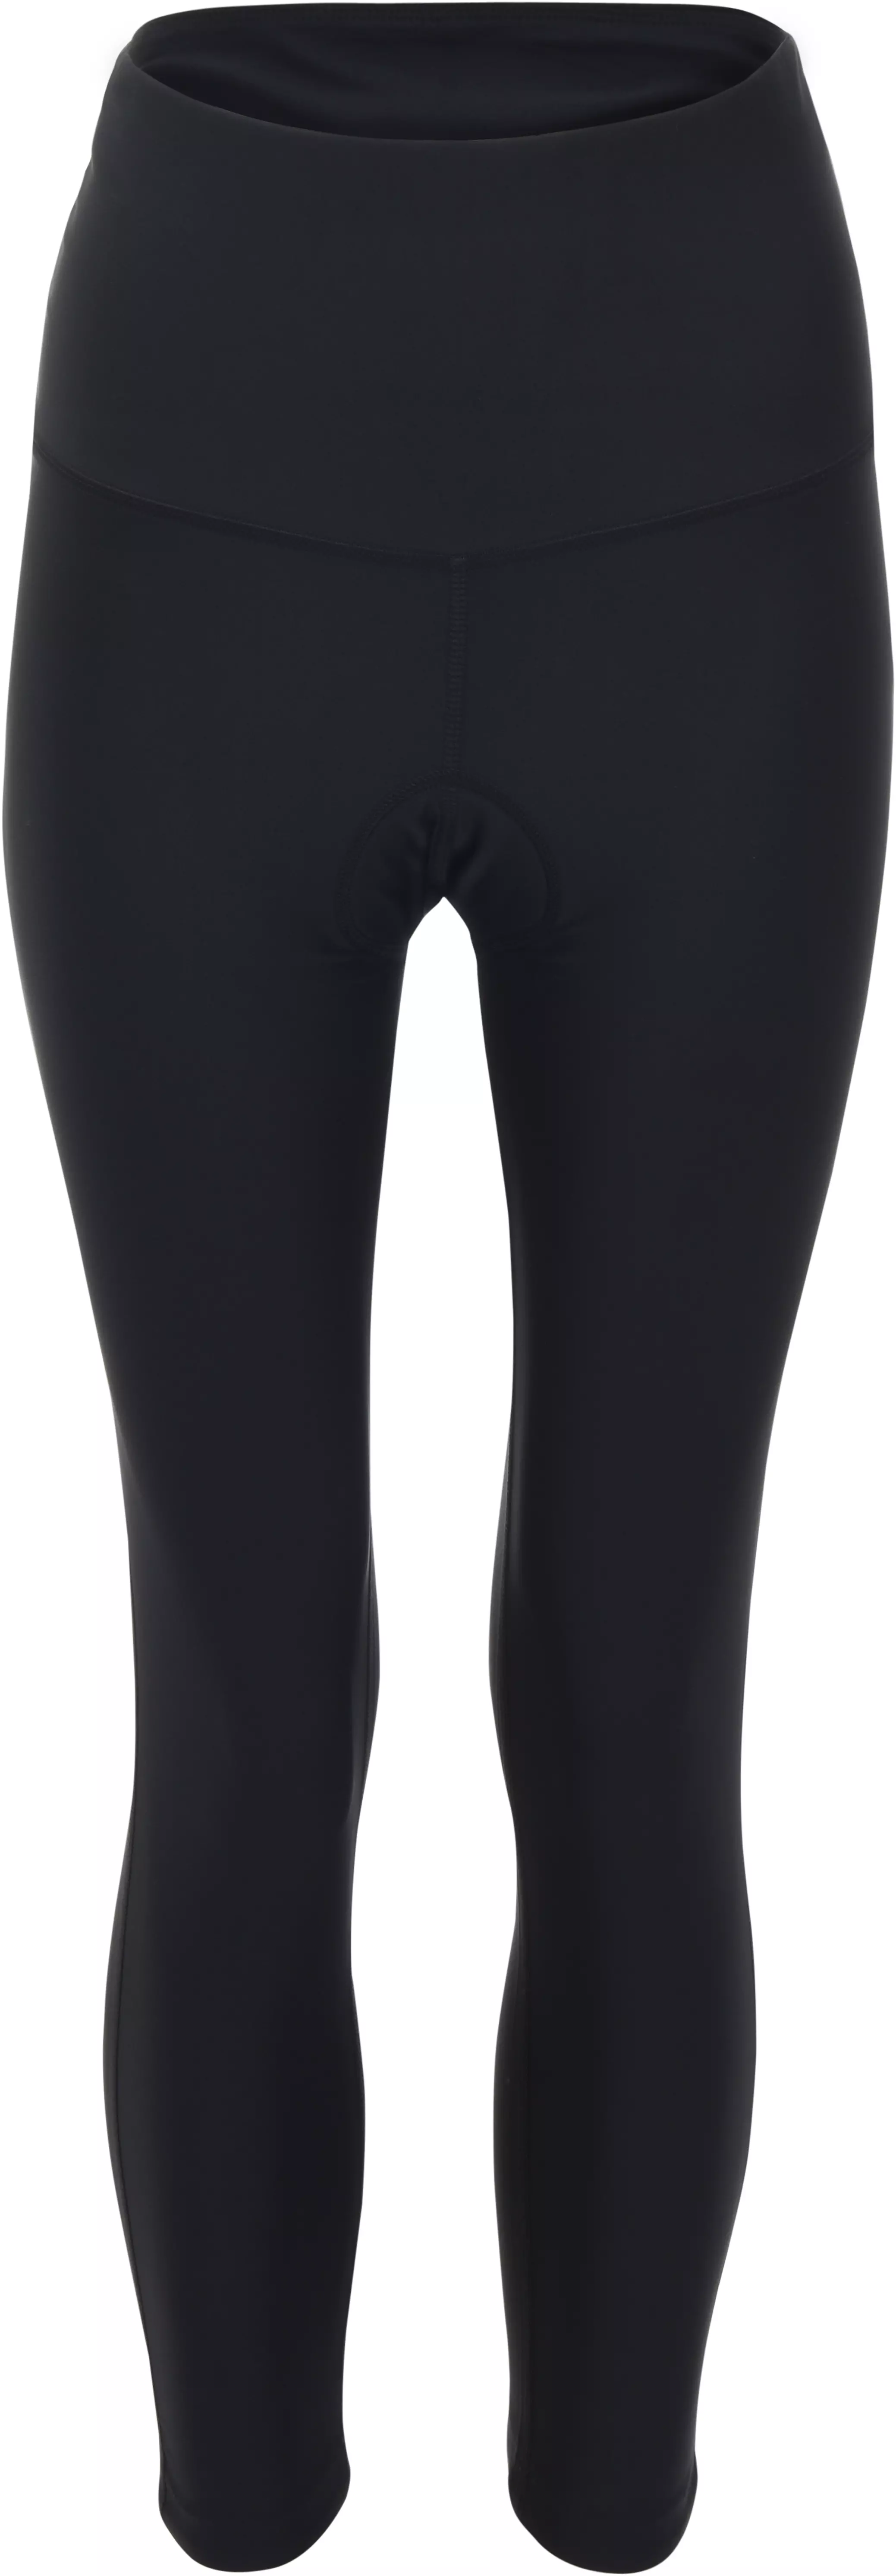 padded cycling trousers womens